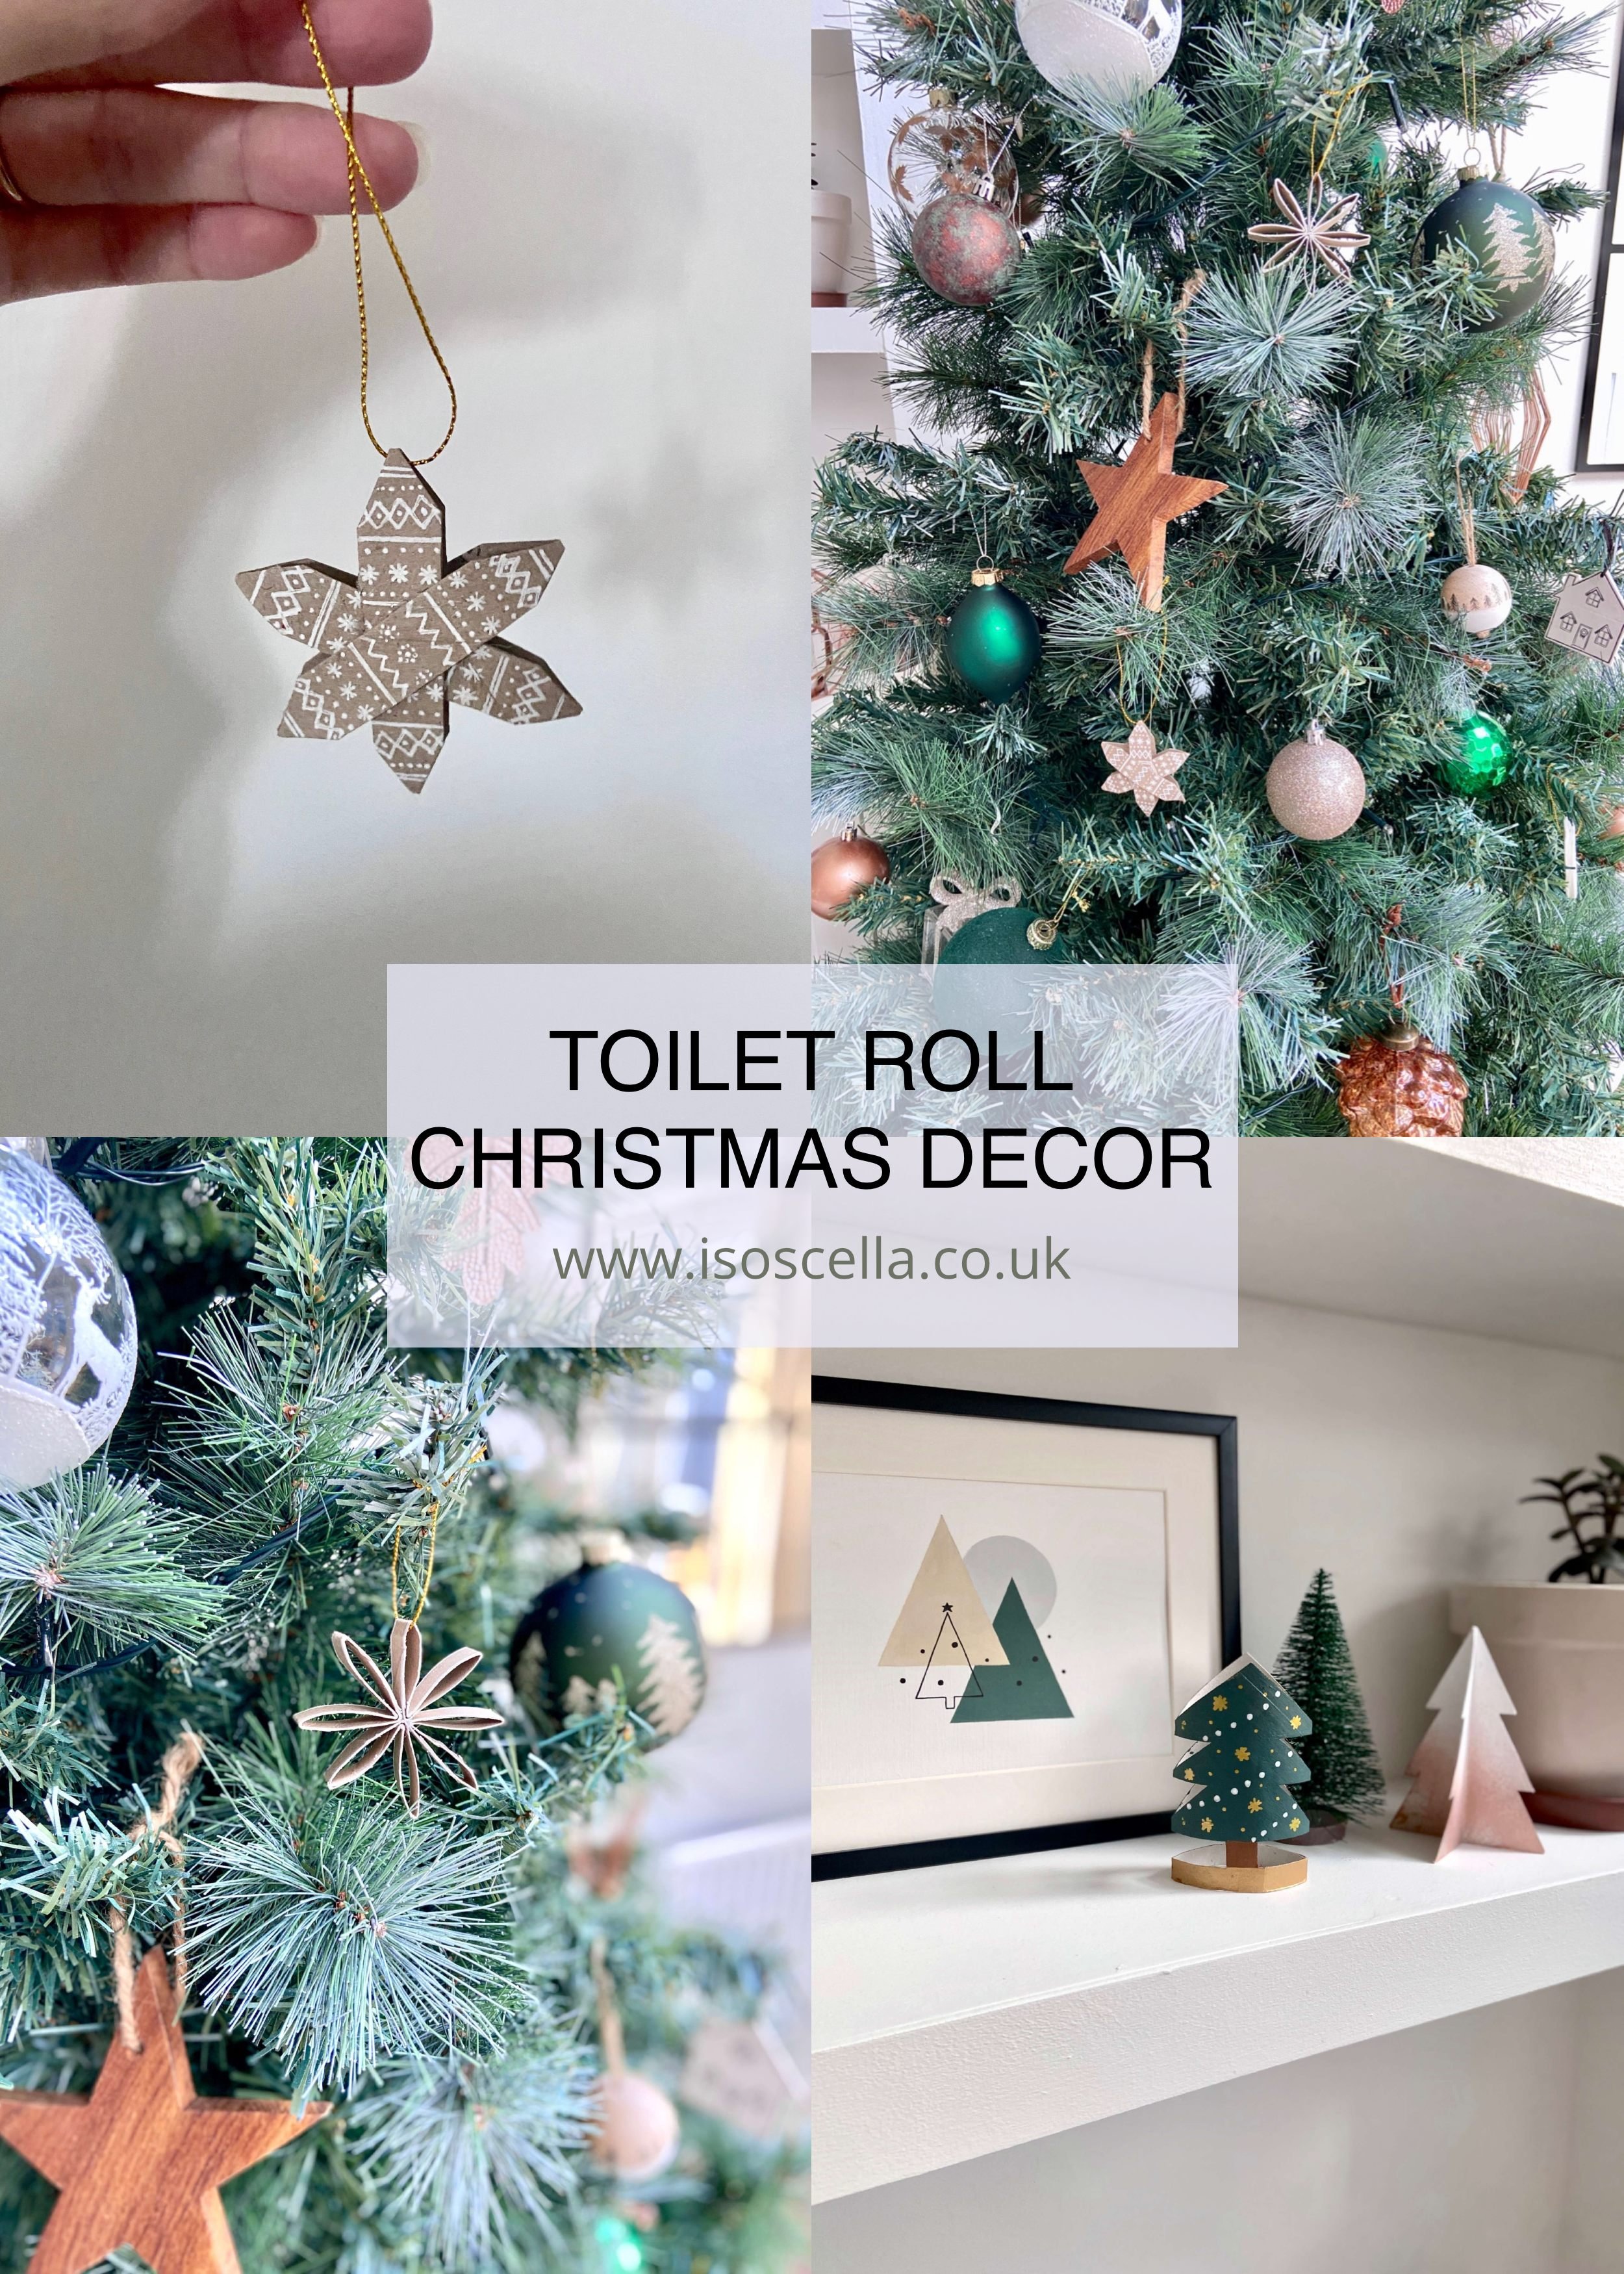 Making Festive Toilet Roll Christmas Decorations